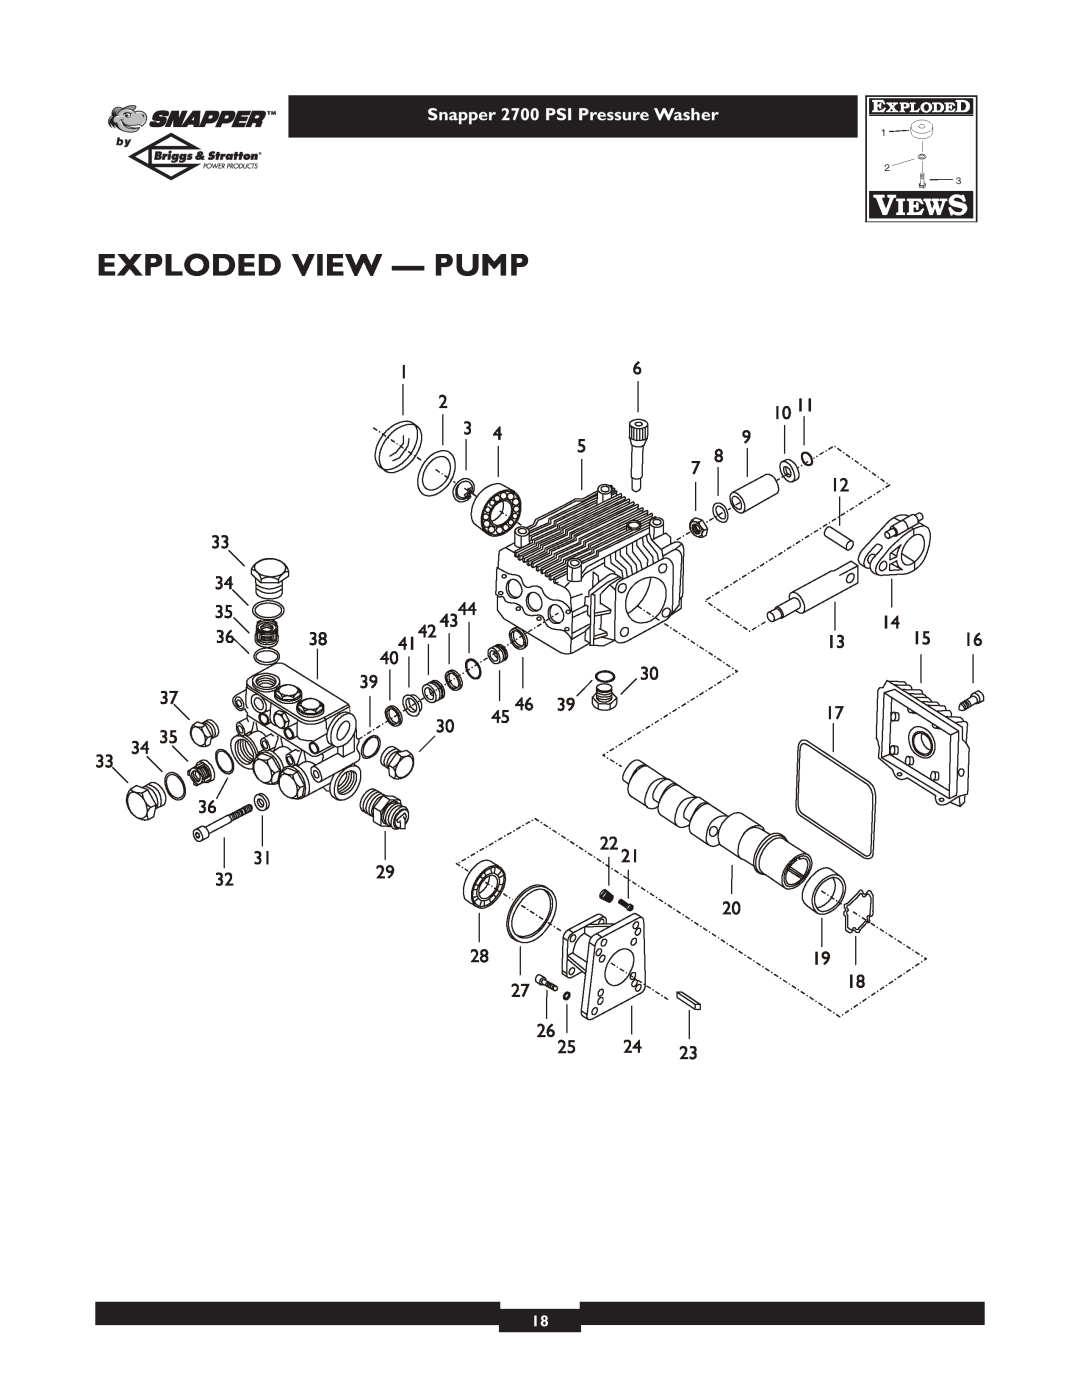 Briggs & Stratton 2700PSI owner manual Exploded View - Pump, Snapper 2700 PSI Pressure Washer 